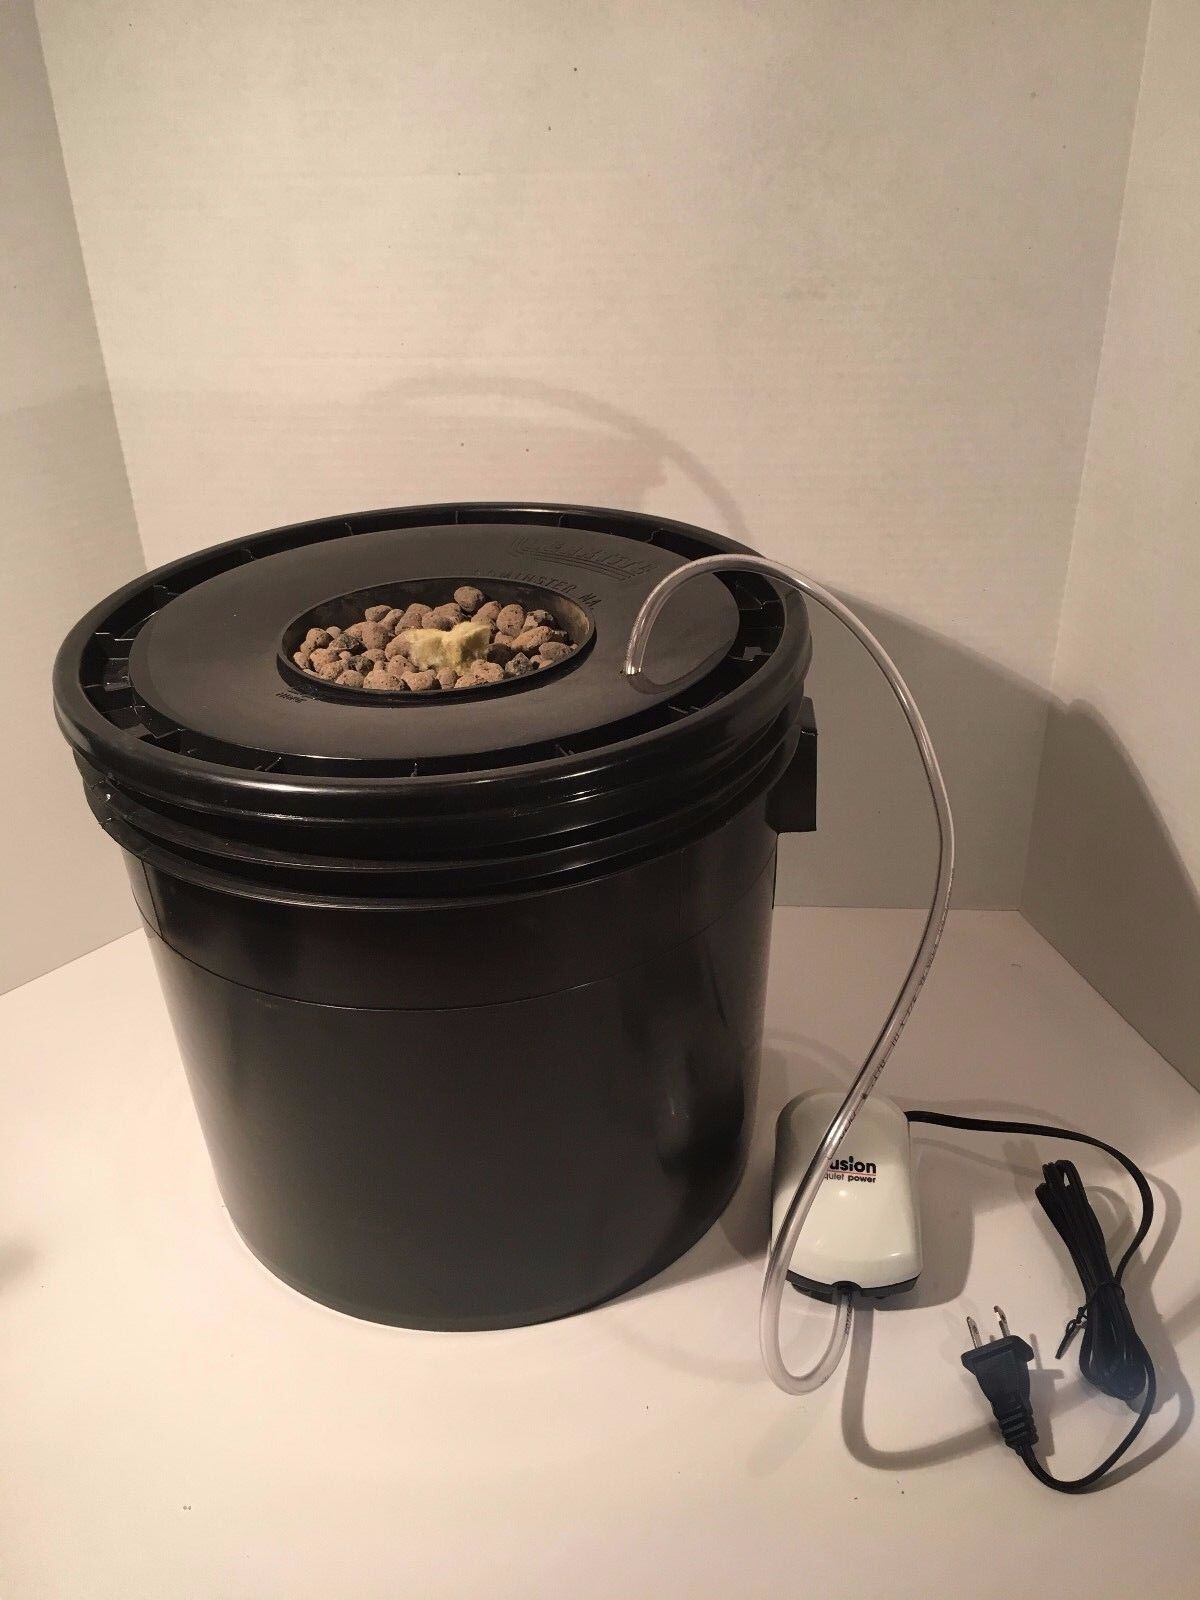 Complete Hydroponic System - 1 Site DWC Hydroponic Grow Kit - Bubble Bucket